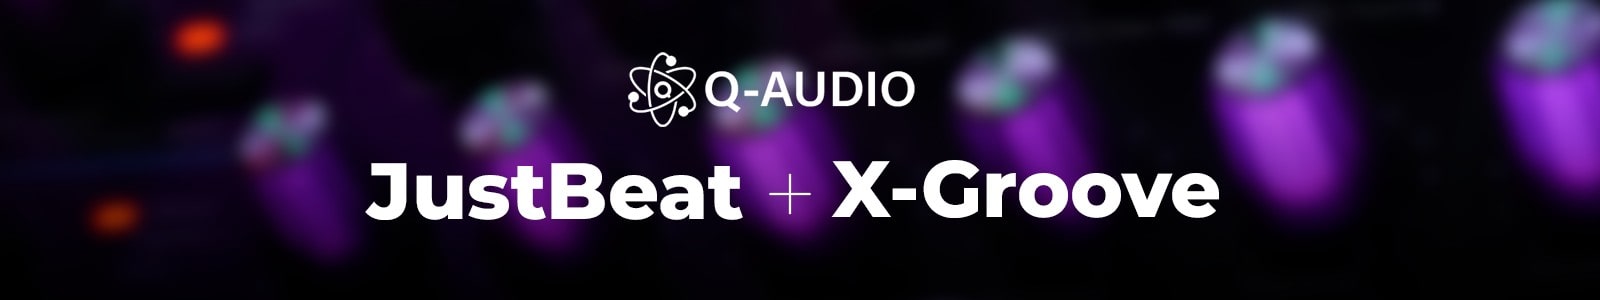 JustBeat + X-Groove Bundle by Q-Audio